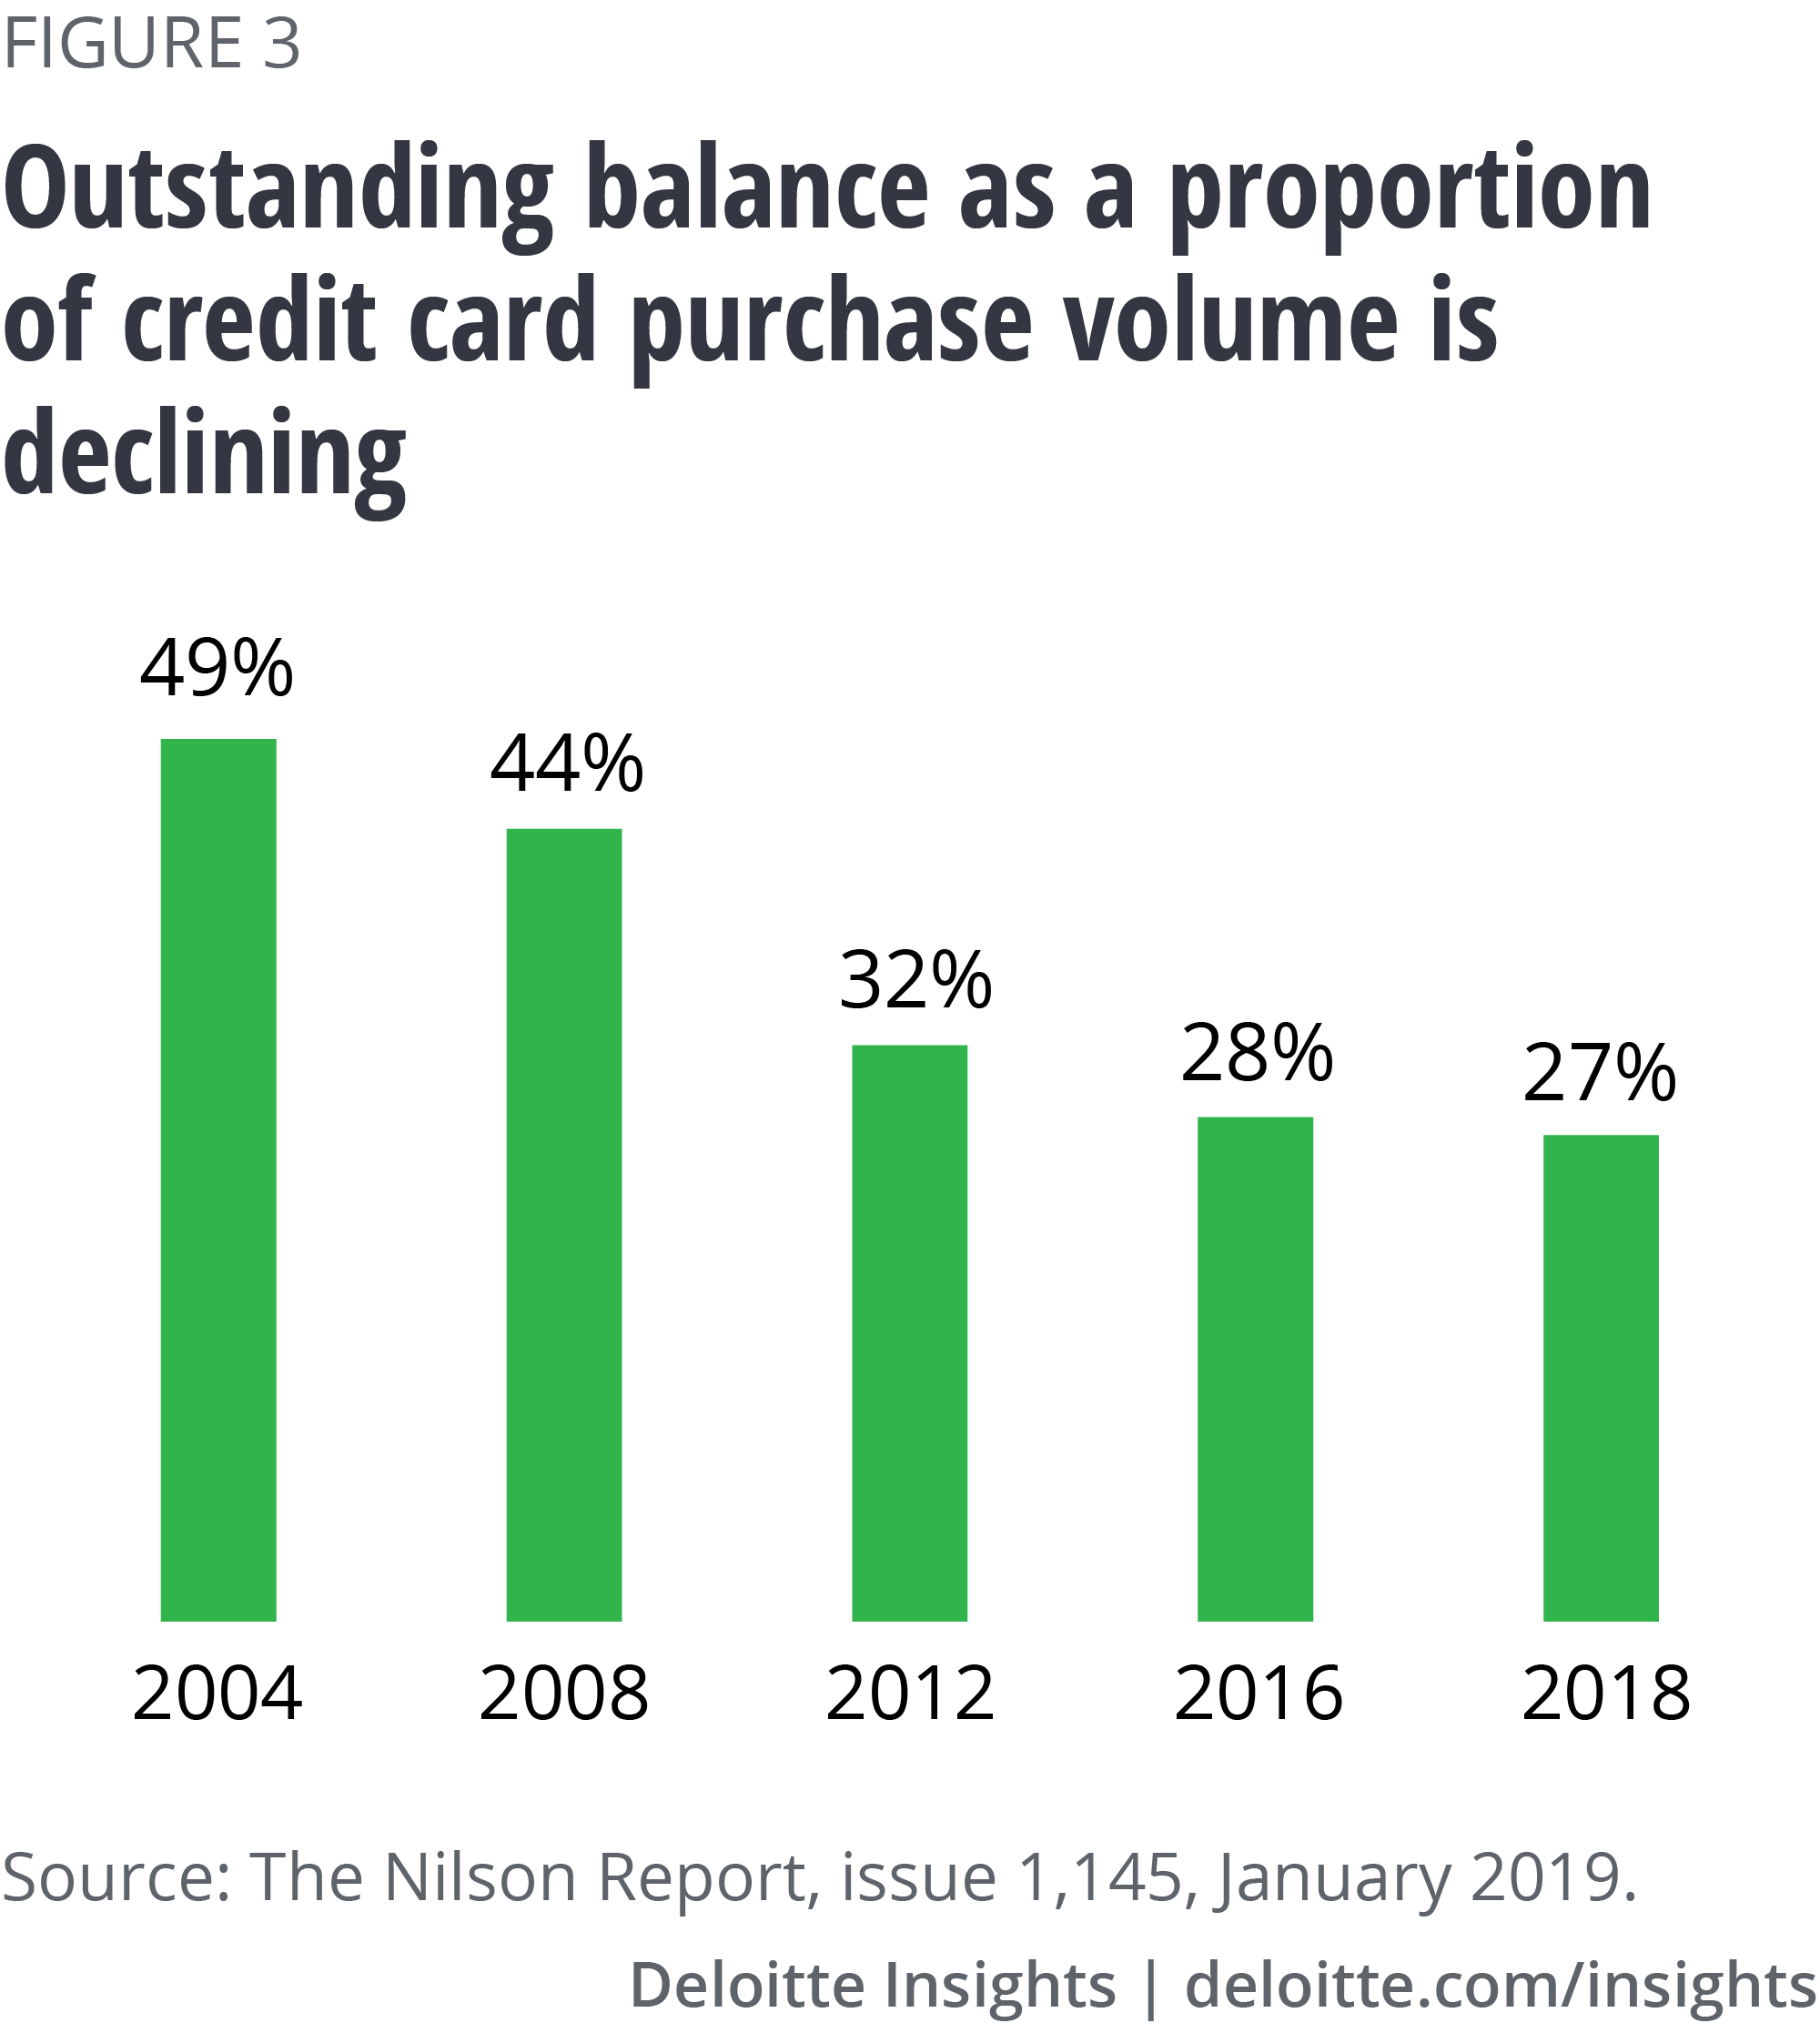 Outstanding balance as a proportion of credit card purchase volume is declining